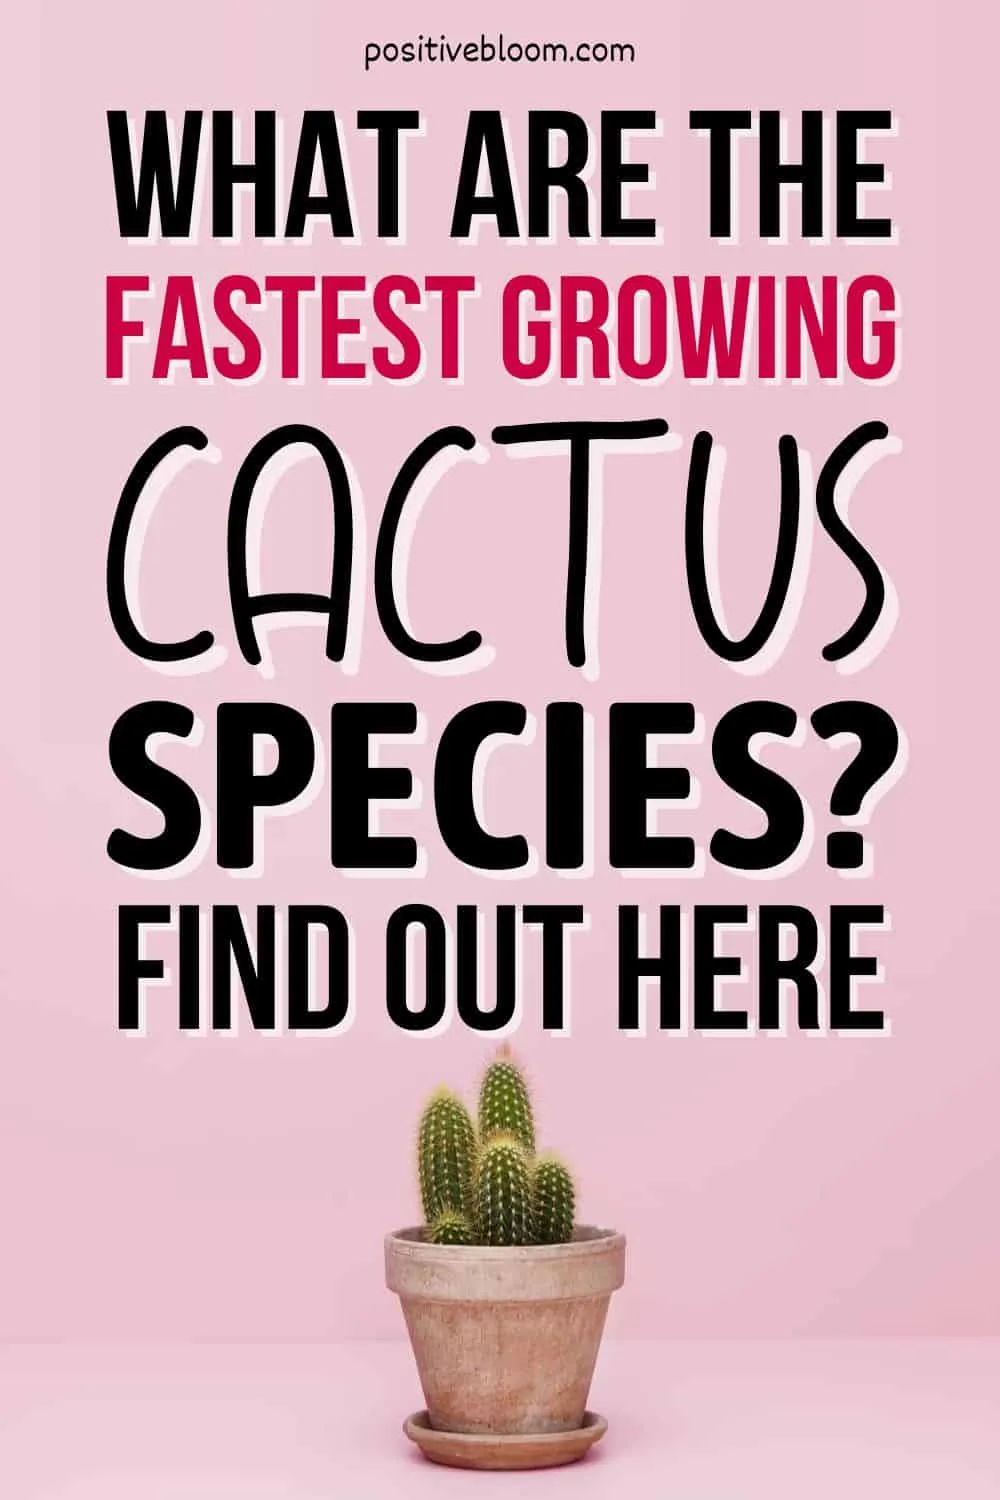 What Are The Fastest Growing Cactus Species Find Out Here Pinterest